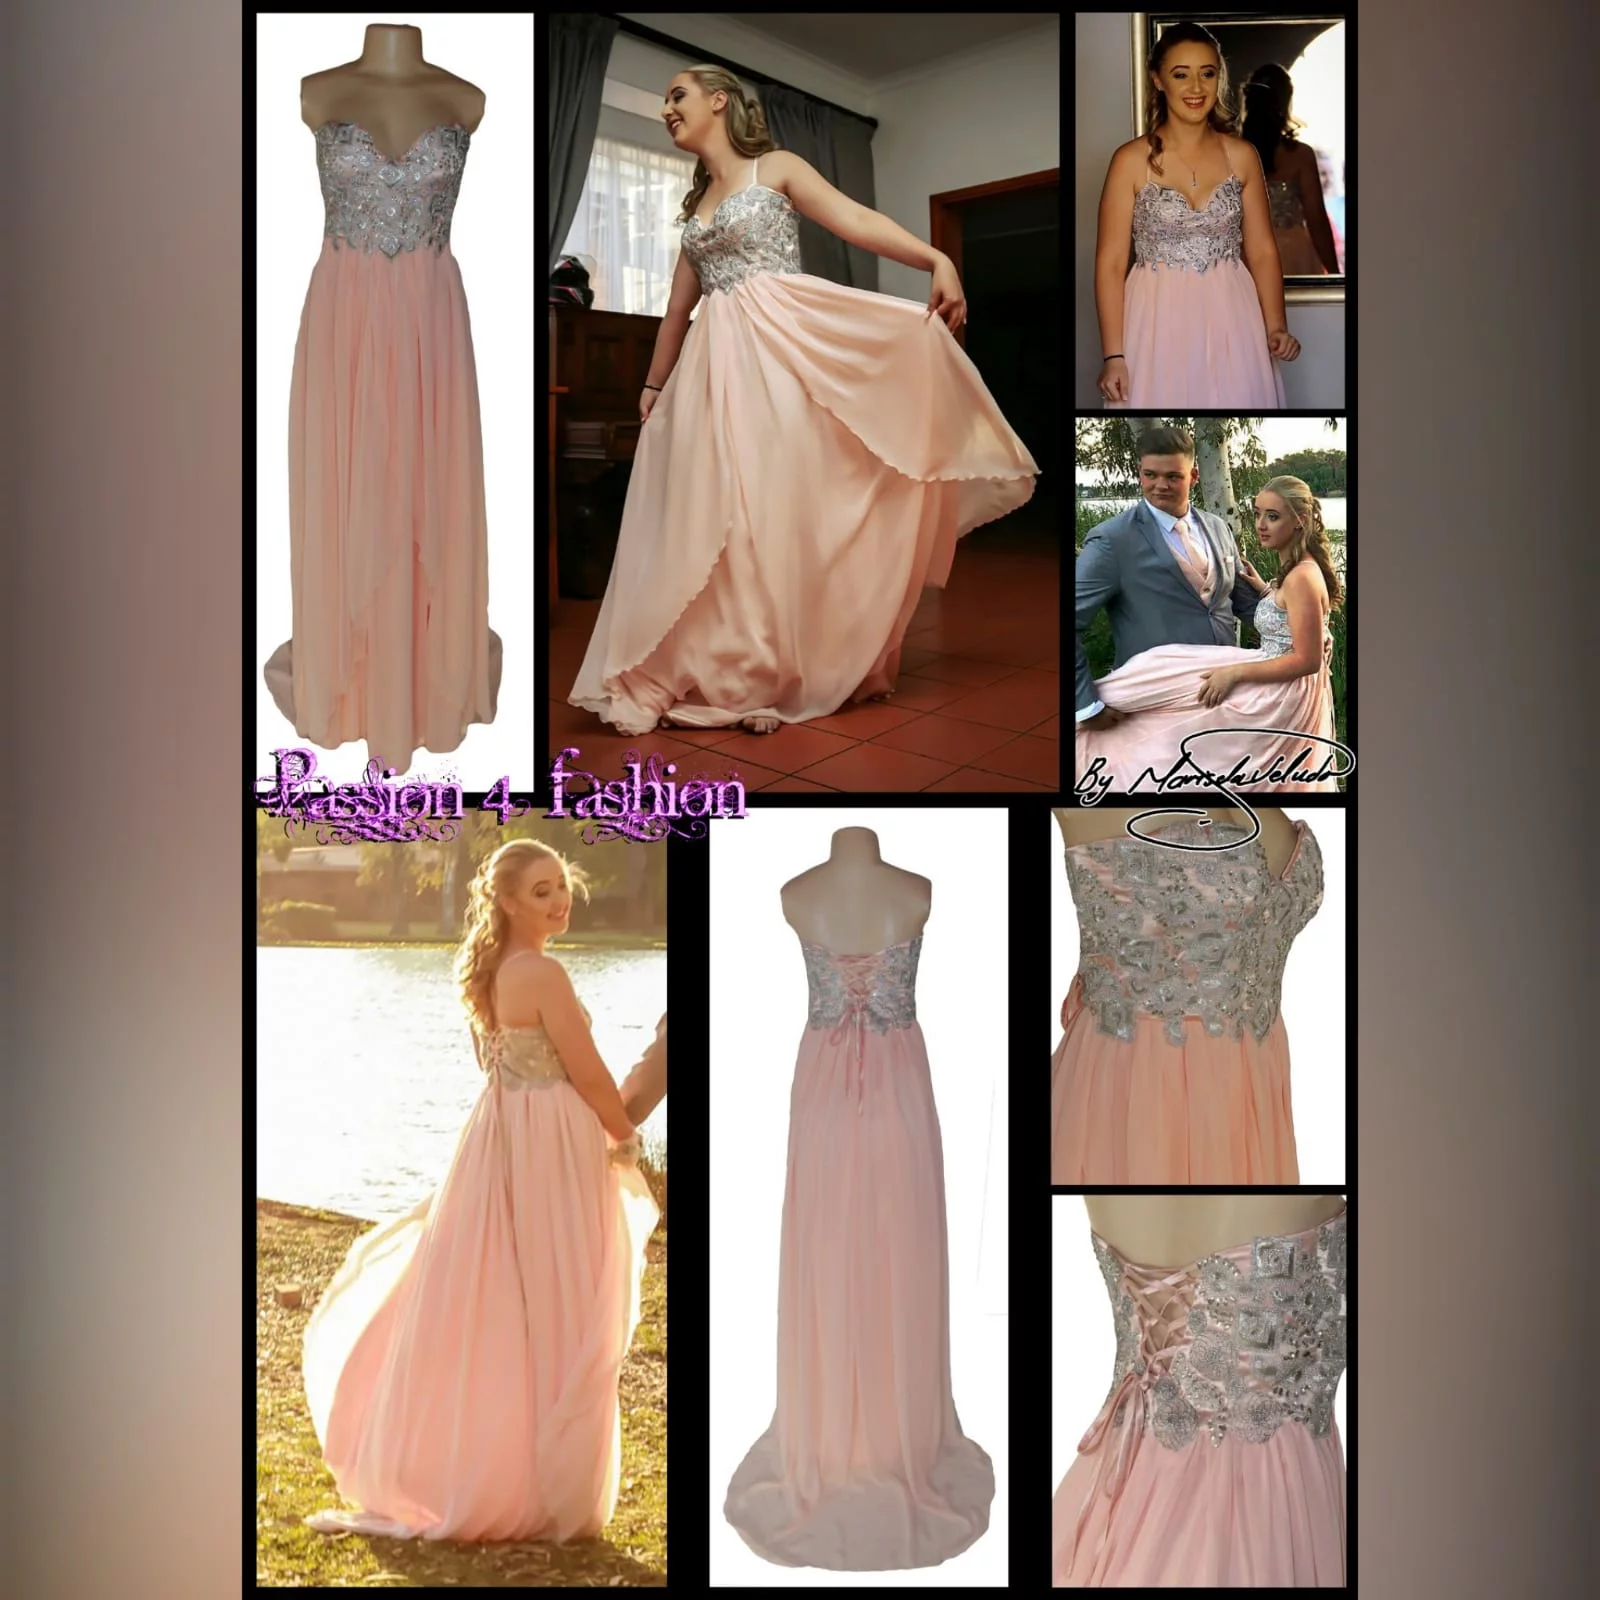 Peach and silver fun prom dress 9 peach and silver fun prom dress. Bodice detailed with appliques and beads, with a lace-up back. Bottom with gathered chiffon and an overlayer opened in front.